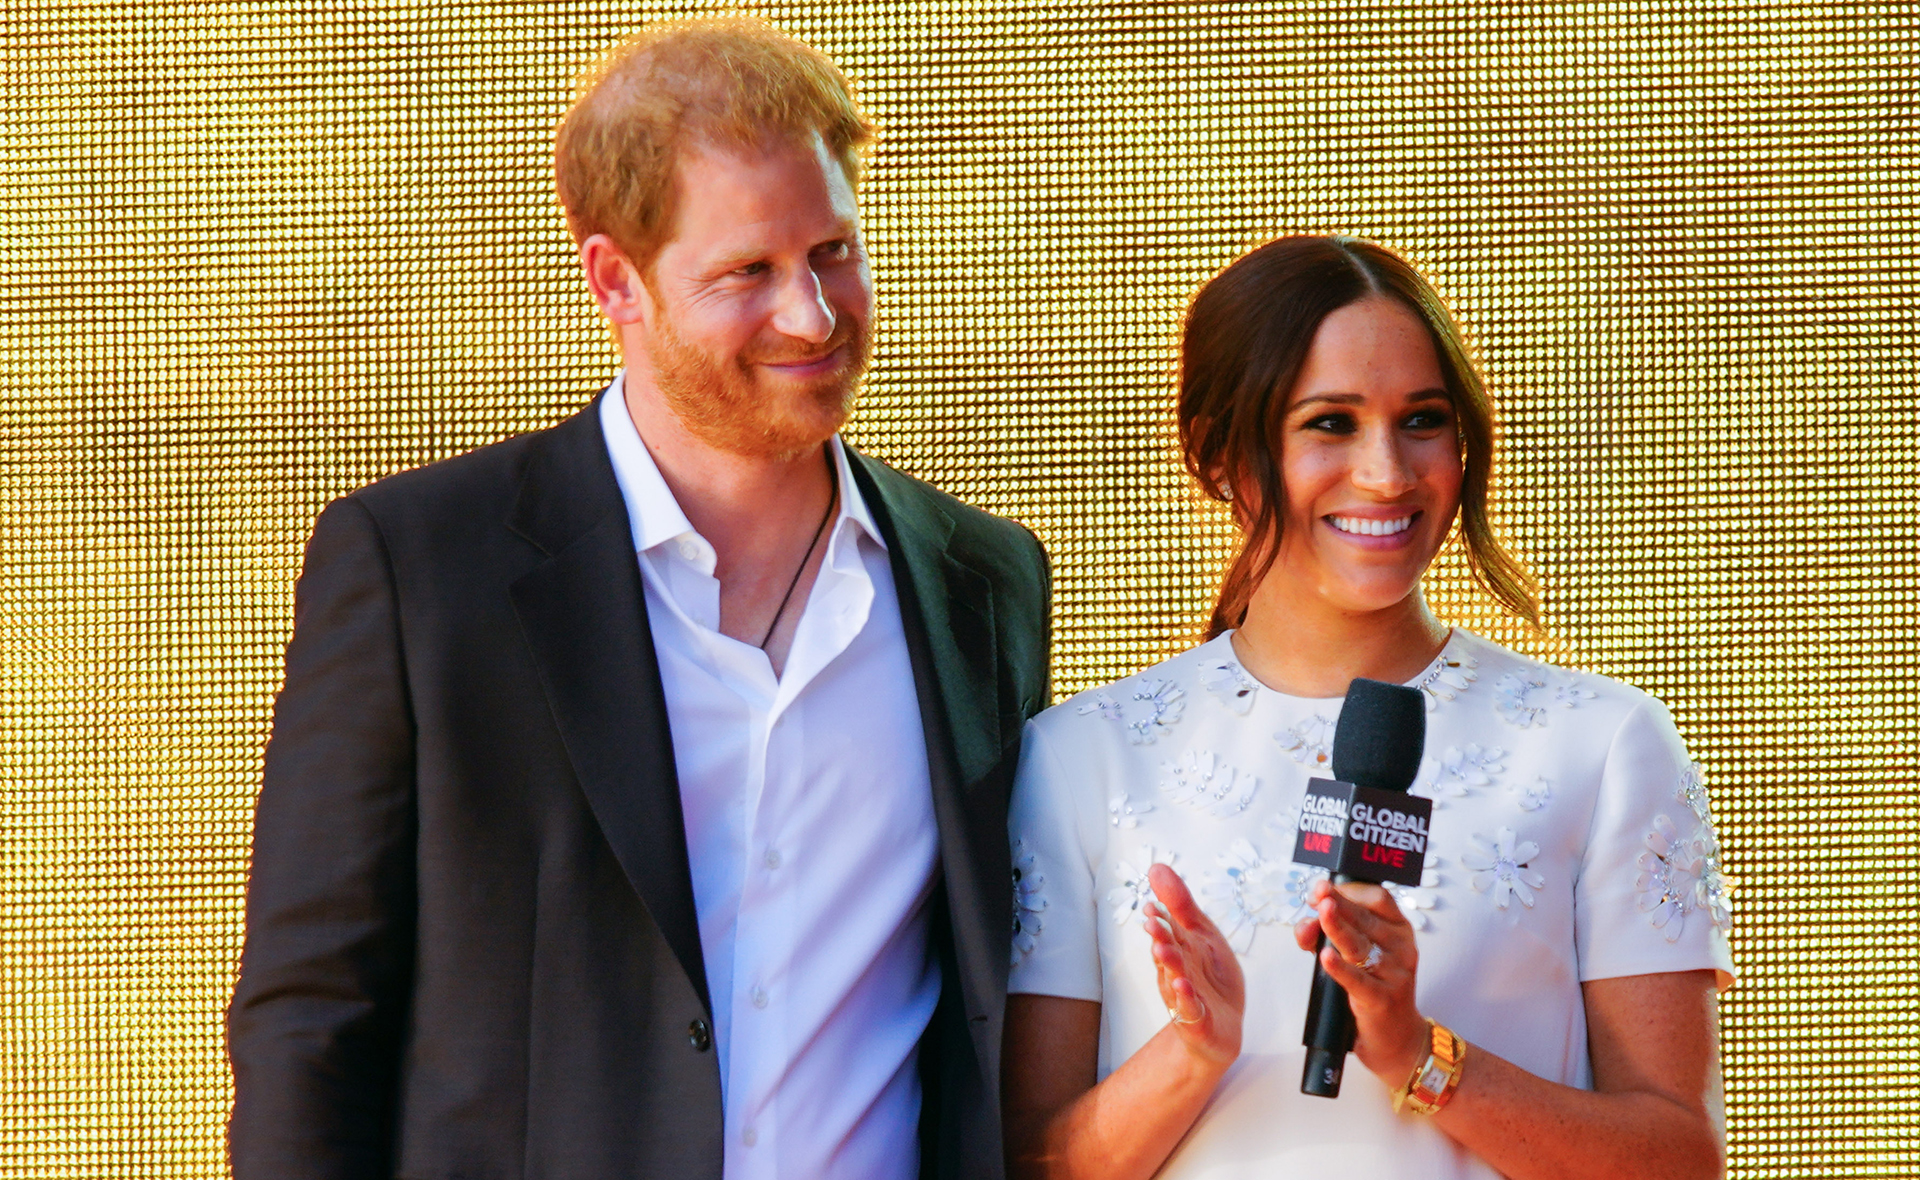 Prince Harry will be jetting back to New York much sooner than expected, but Duchess Meghan won’t be with him